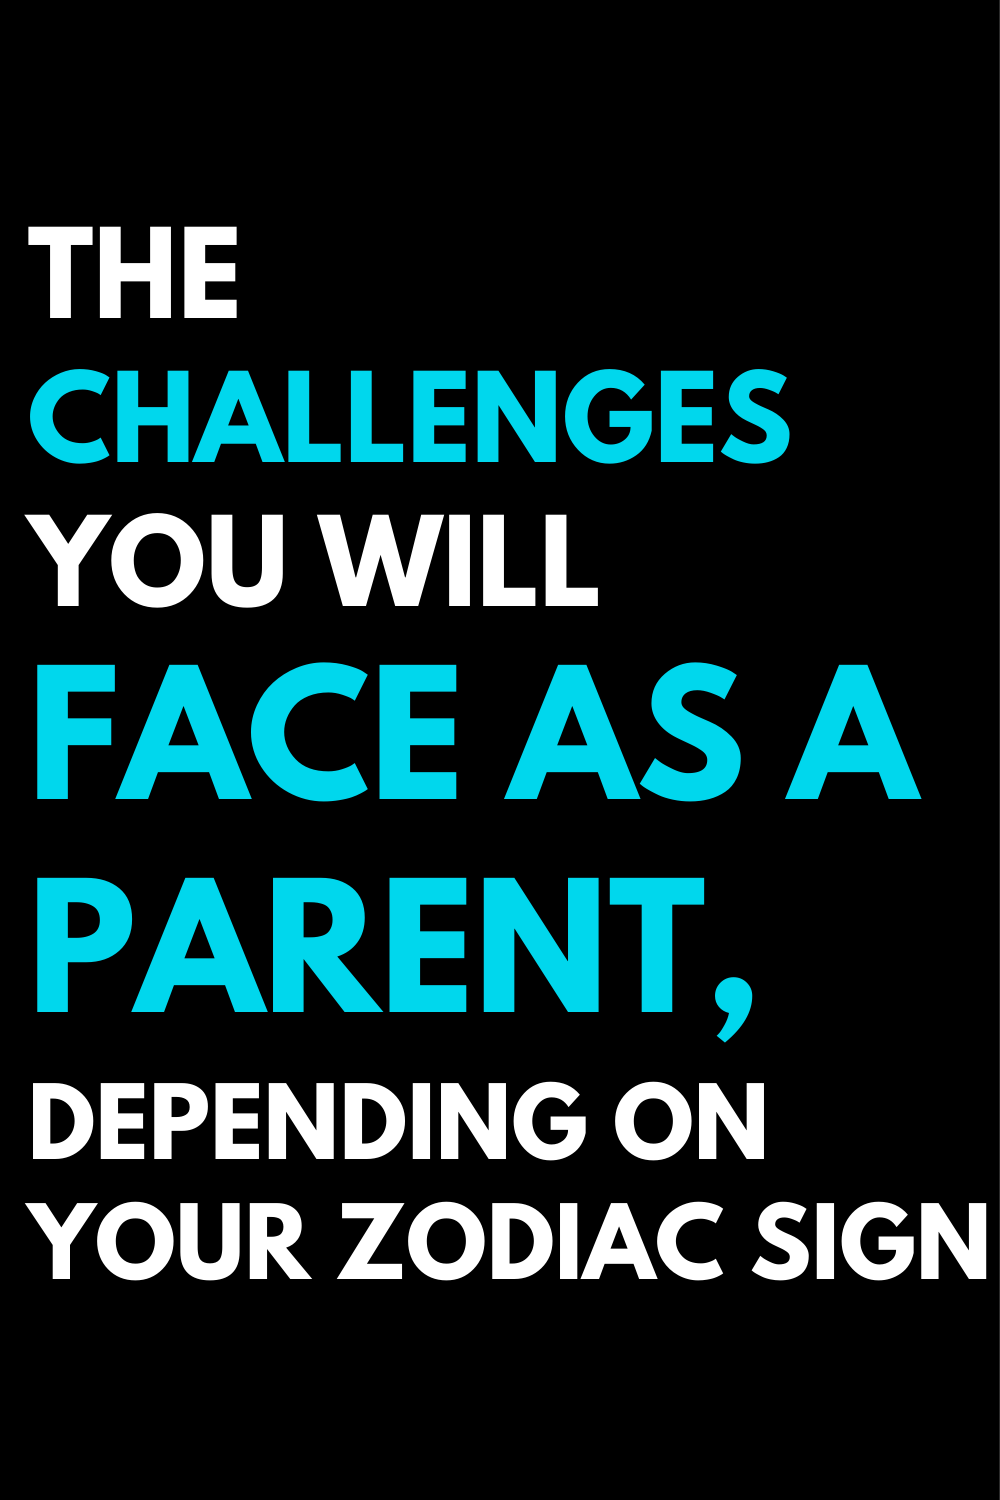 The challenges you will face as a parent, depending on your zodiac sign